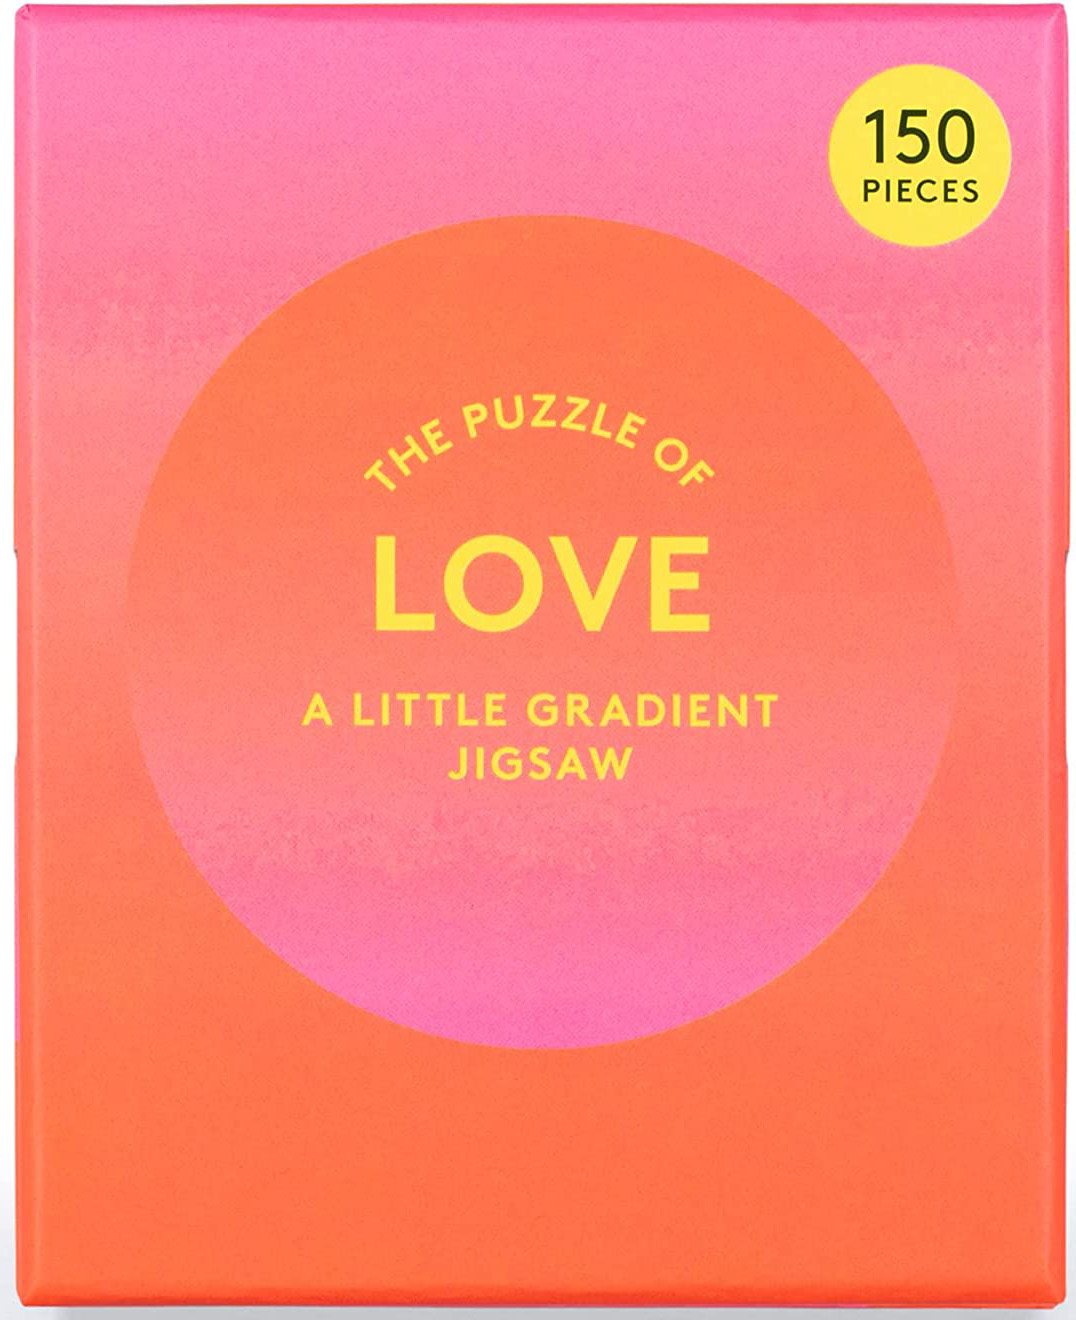 The Puzzle of Love Collage Jigsaw Puzzle